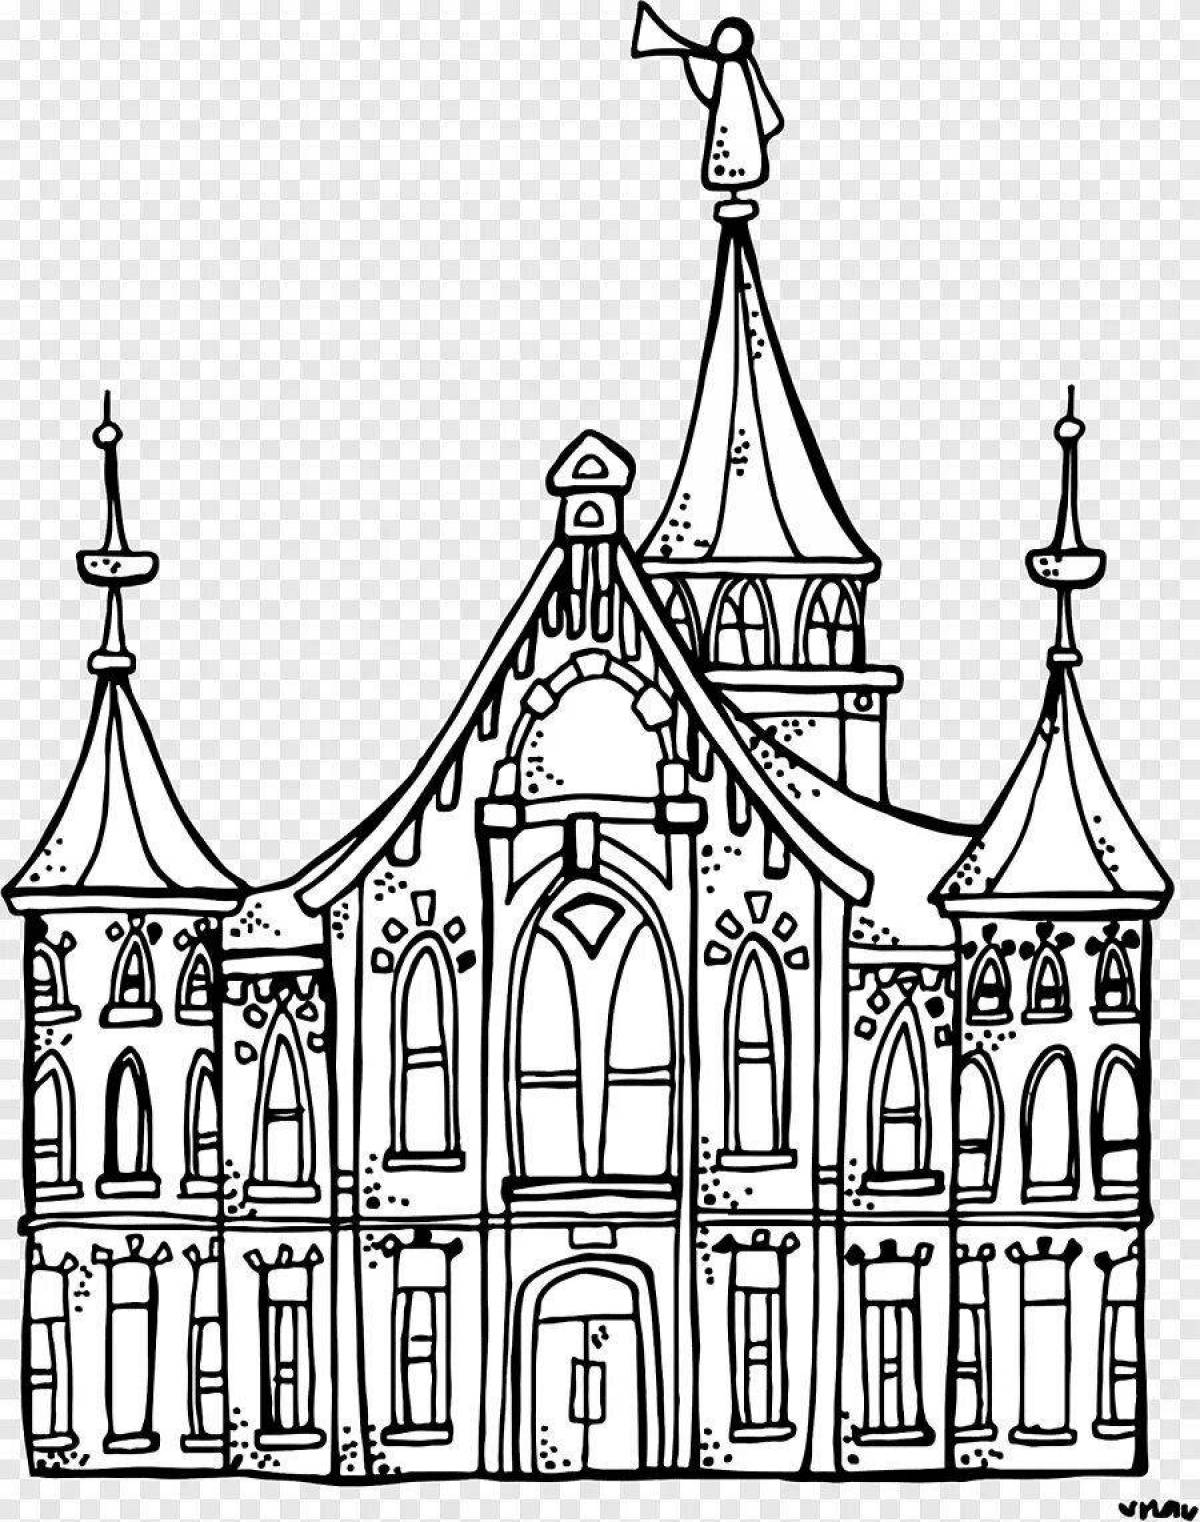 Exquisite architecture coloring page